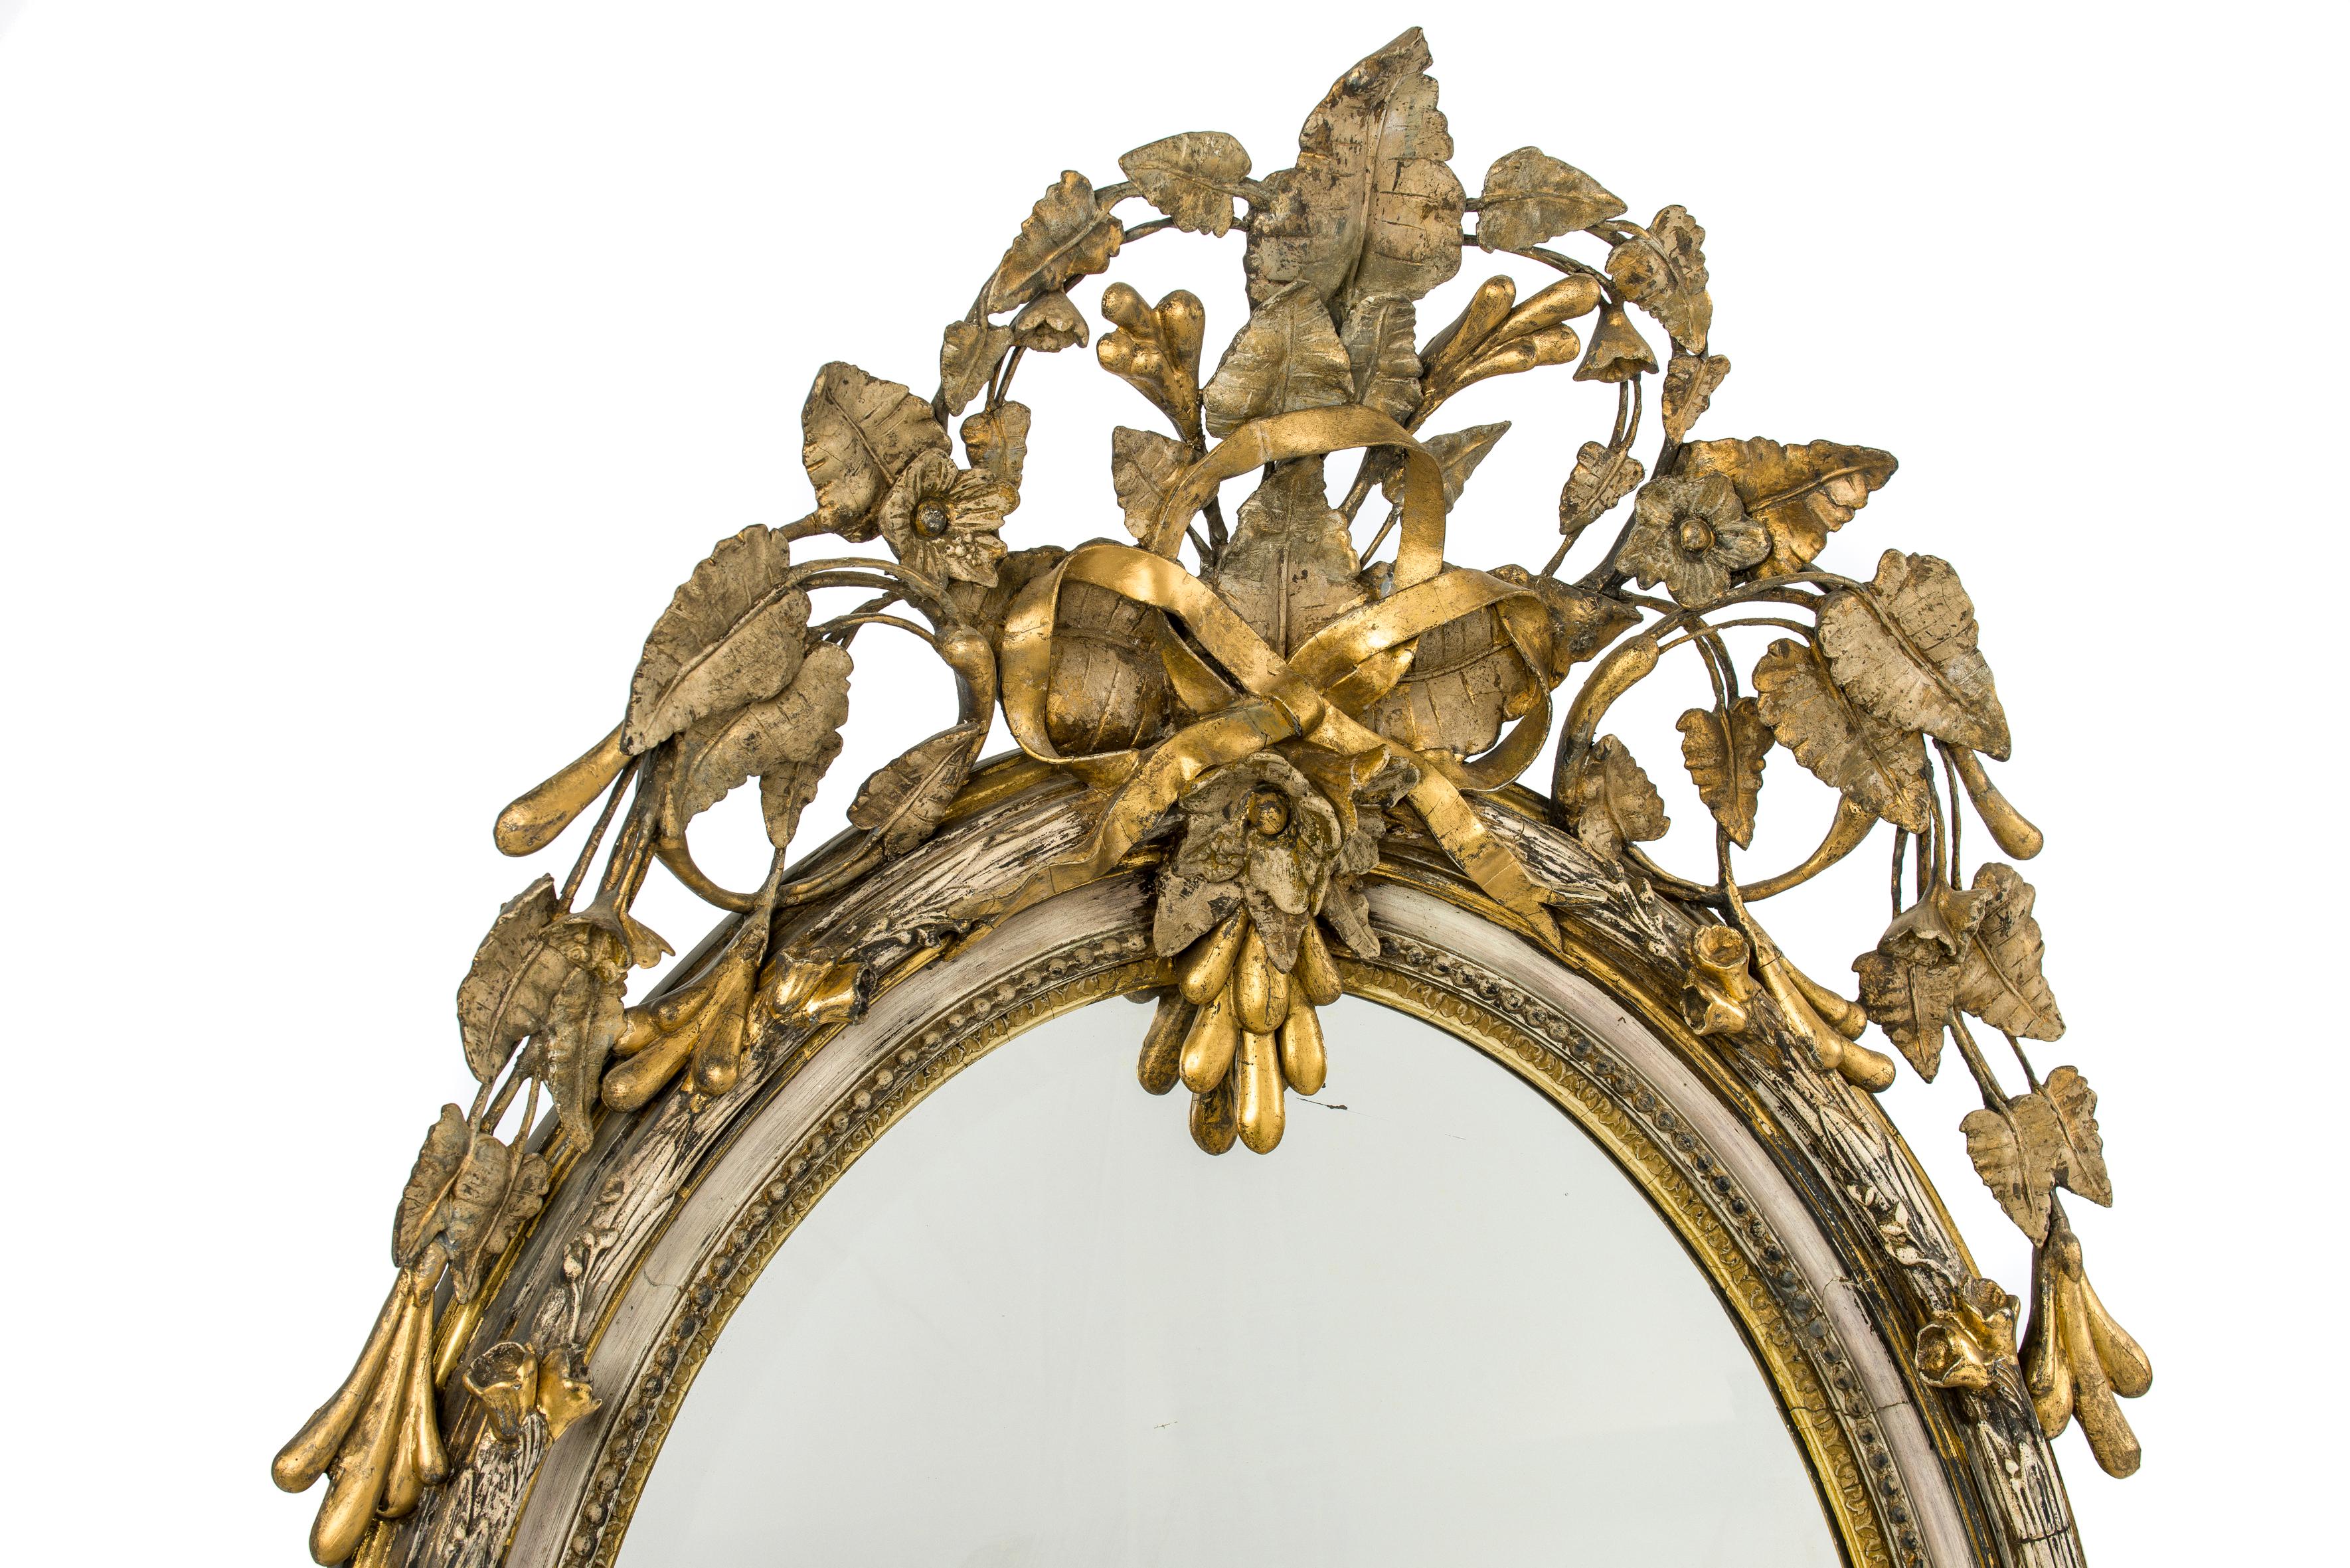 A beautiful and nature-inspired antique oval mirror that was made in France circa 1860. 
The most elevated part of the frame has a bark shape and is decorated with flowers and leaves. The frame is decorated with an intricate crest of the top and